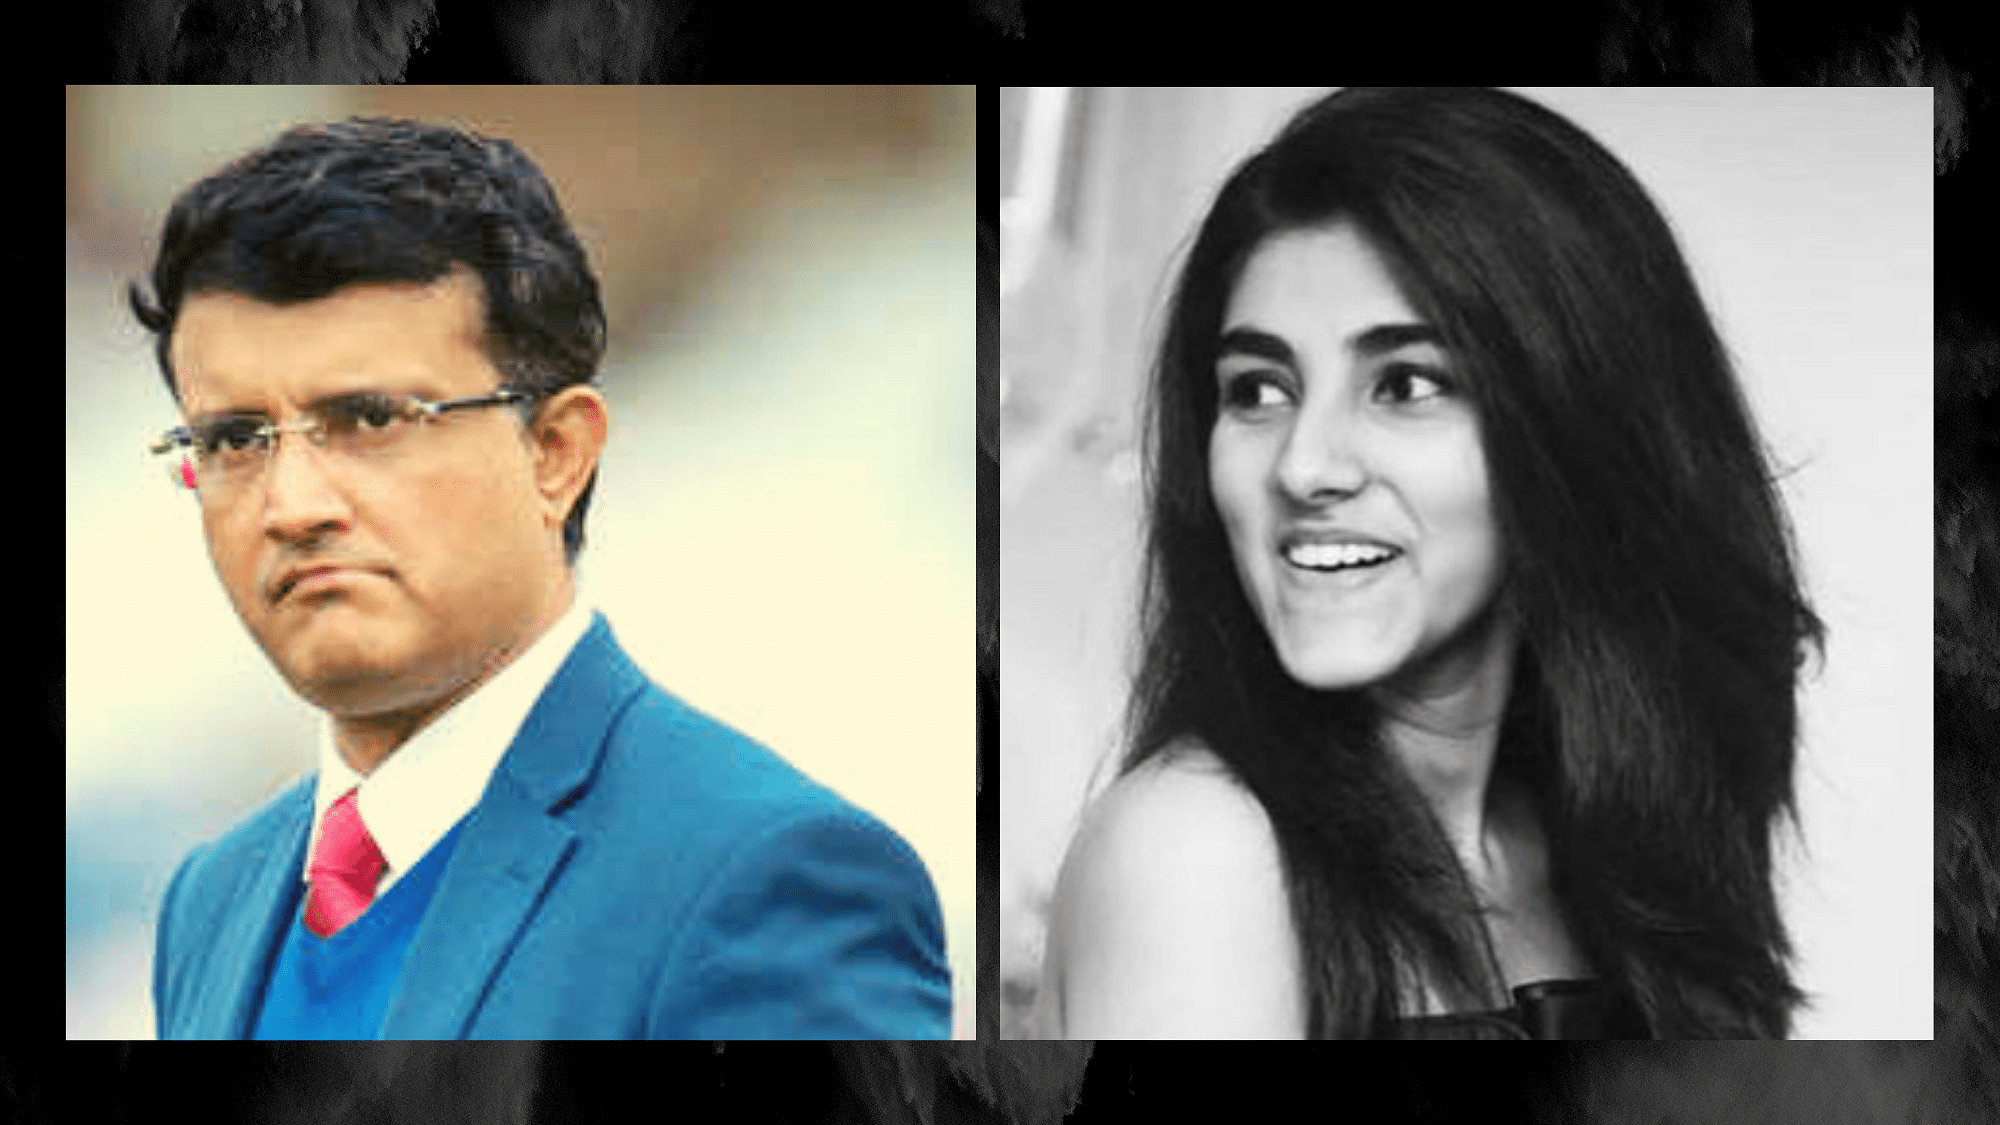 Sourav Ganguly’s daughter Sana had reportedly posted an excerpt on the Sangh’s "fascist tendencies" from Khushwant Singh’s book ‘The End of India’.